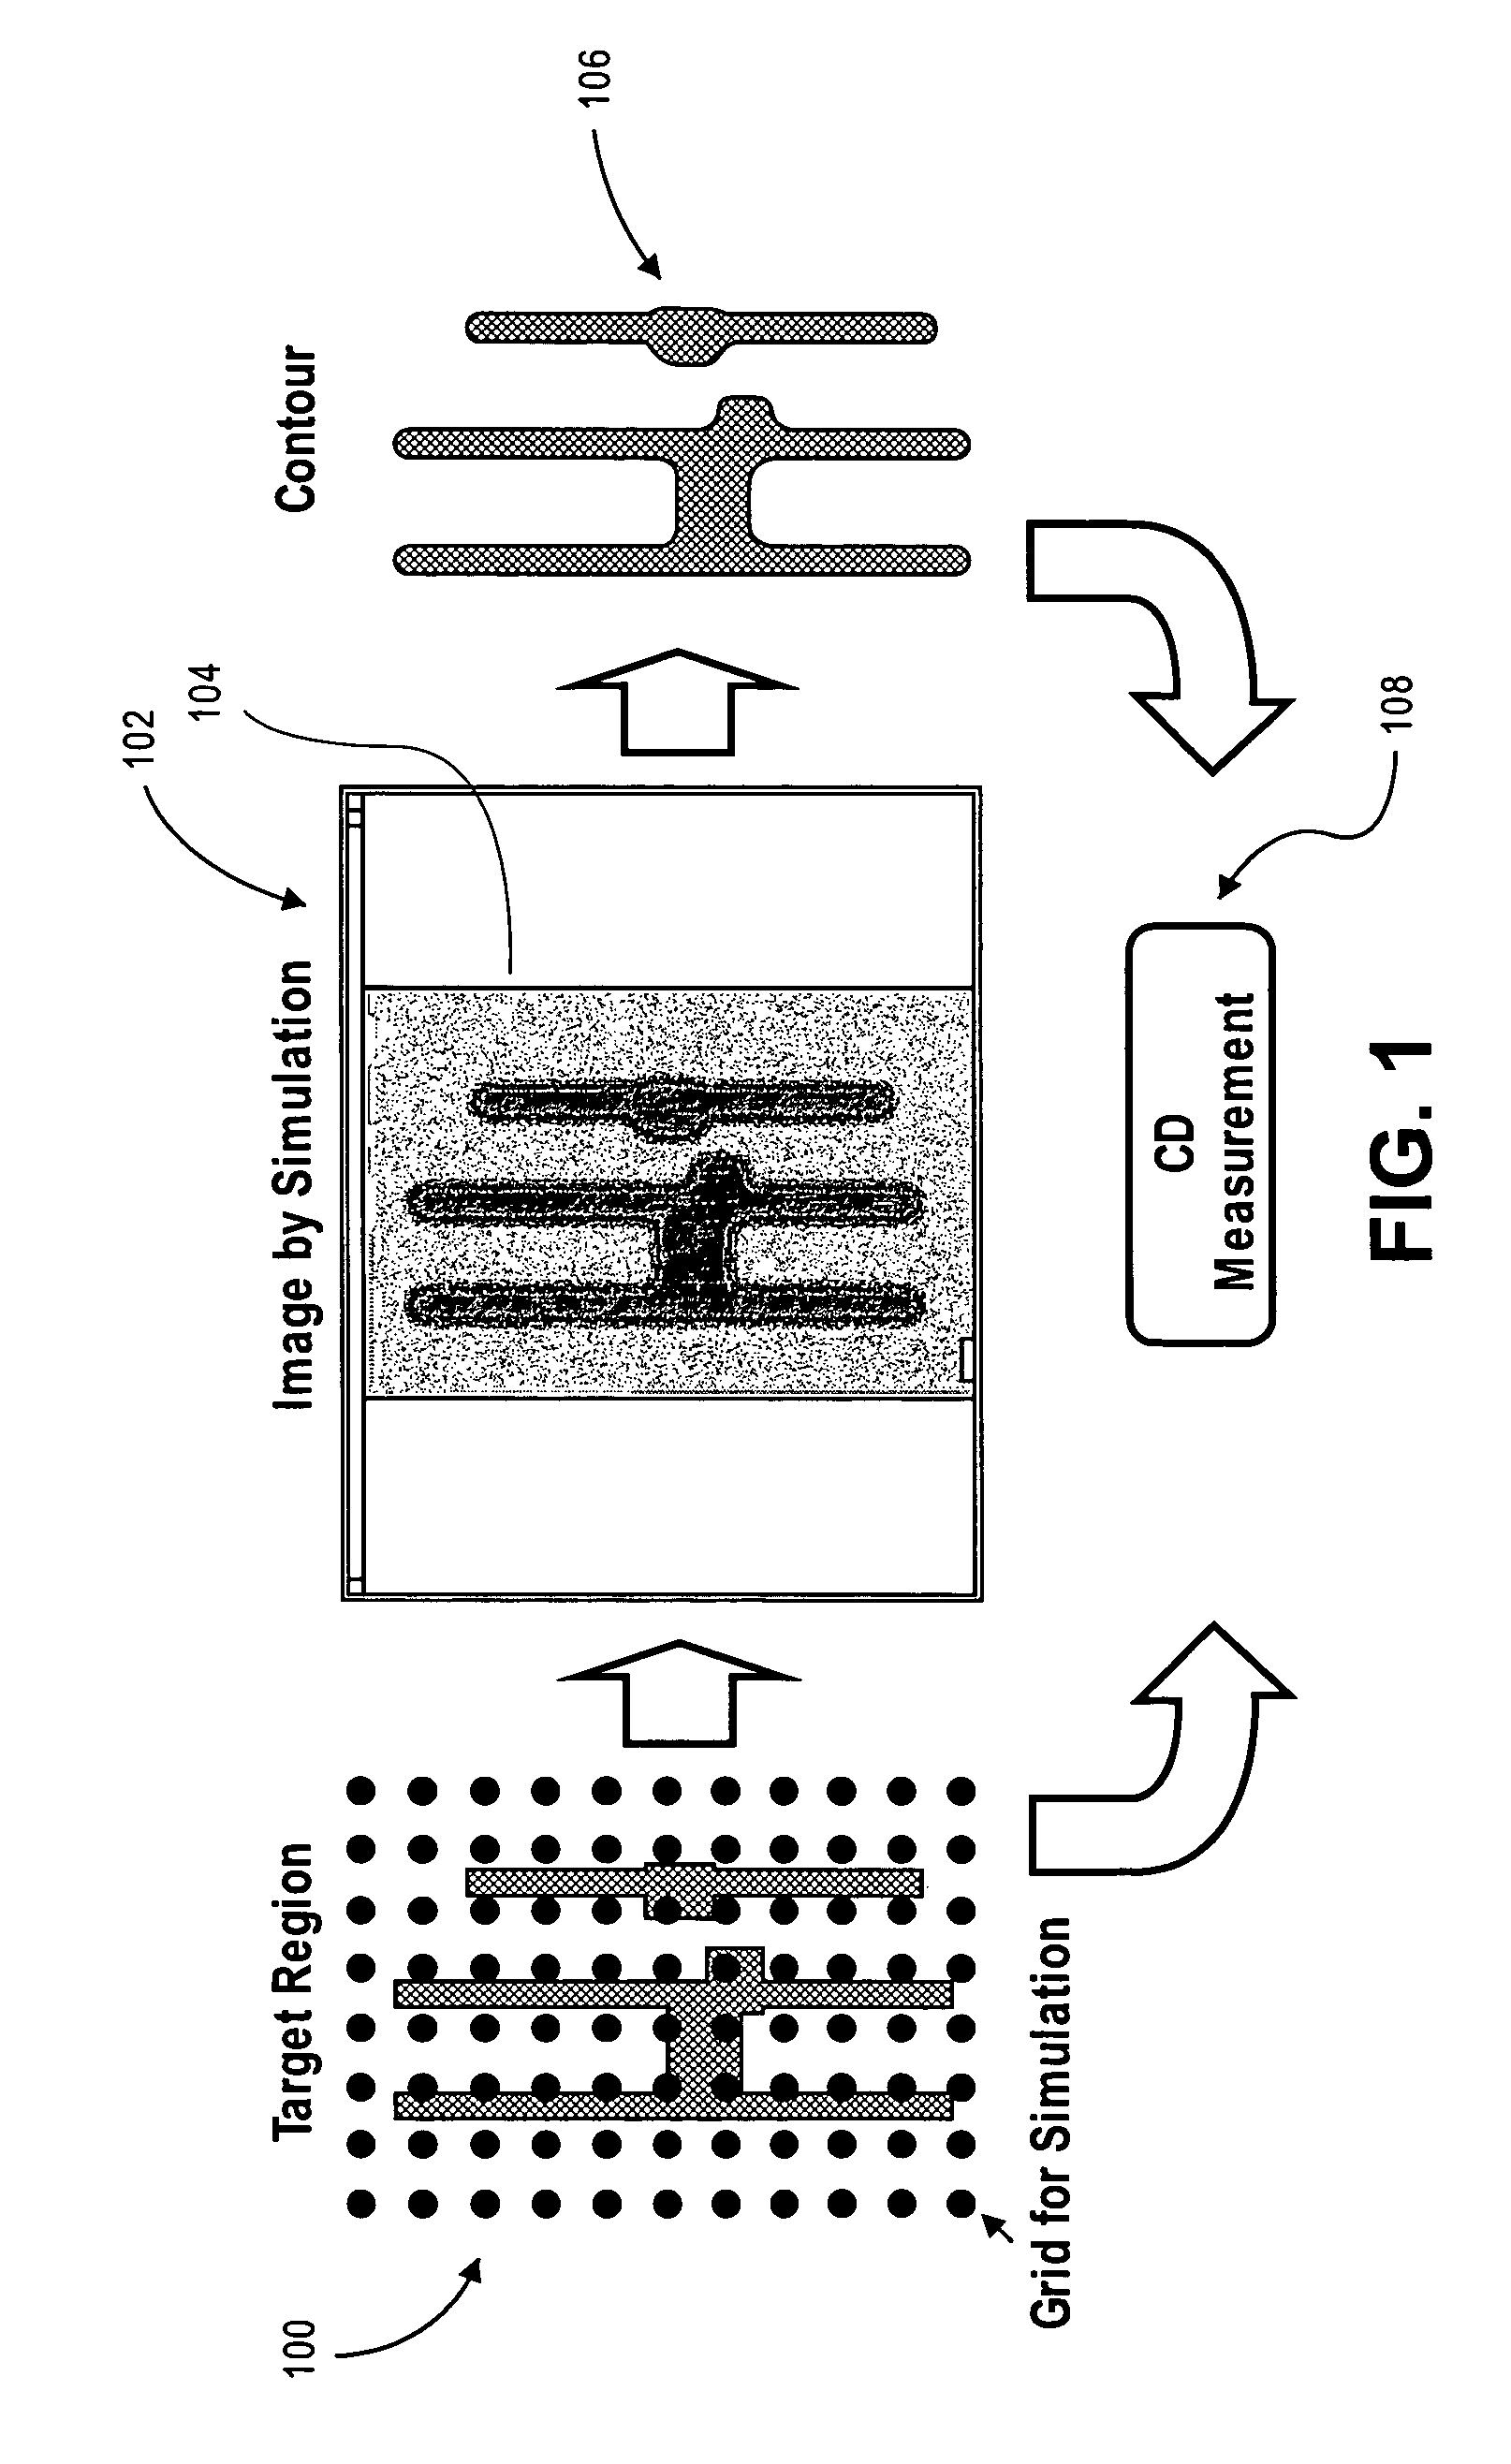 Method and system for lithography simulation and measurement of critical dimensions